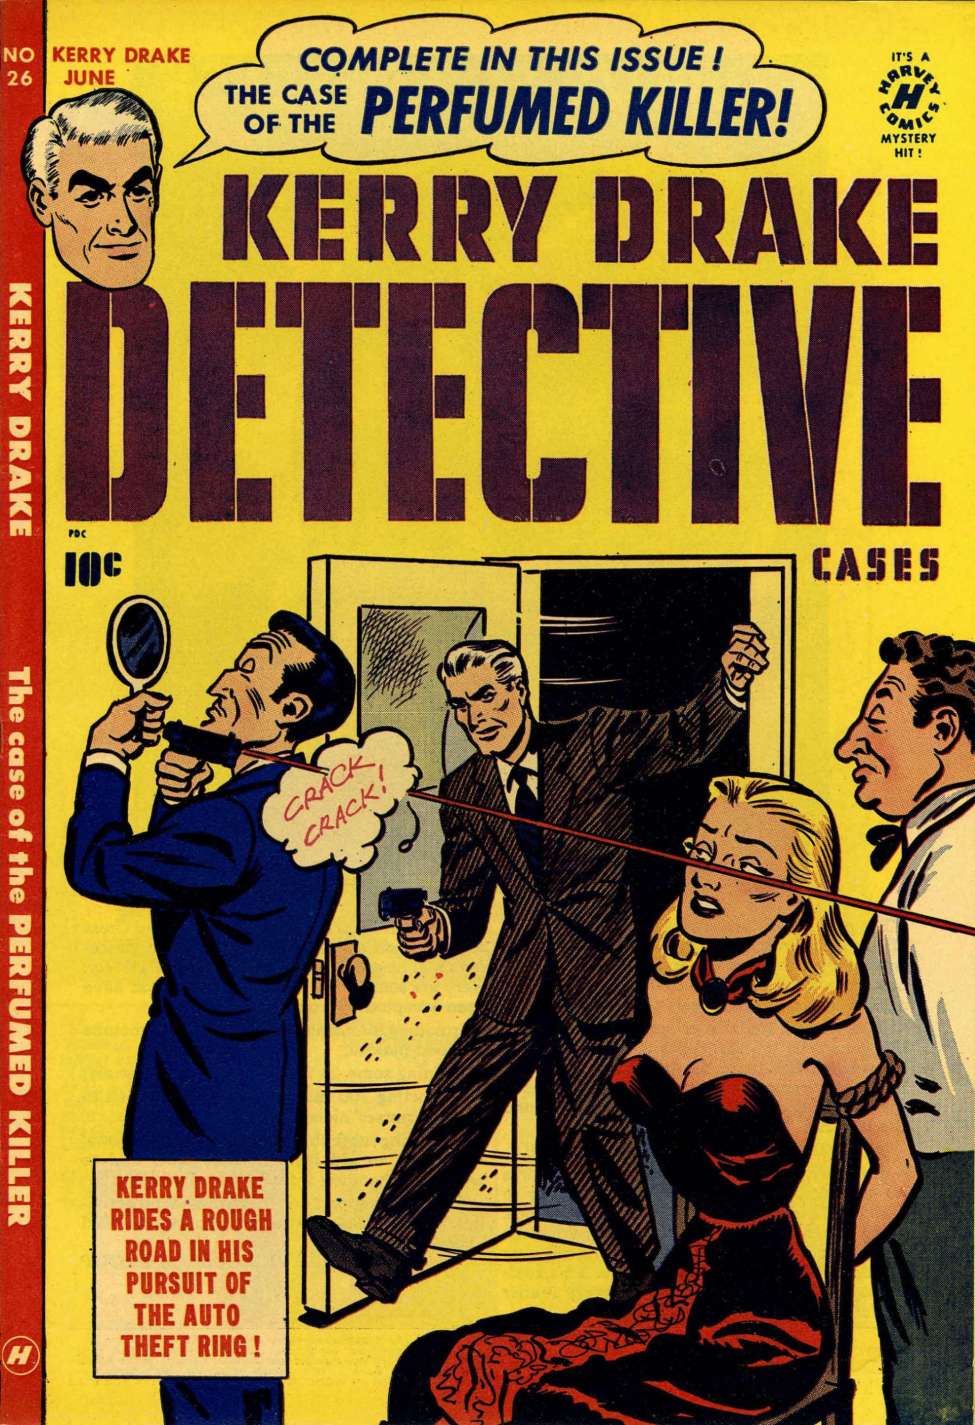 Comic Book Cover For Kerry Drake Detective Cases 26 - Version 2